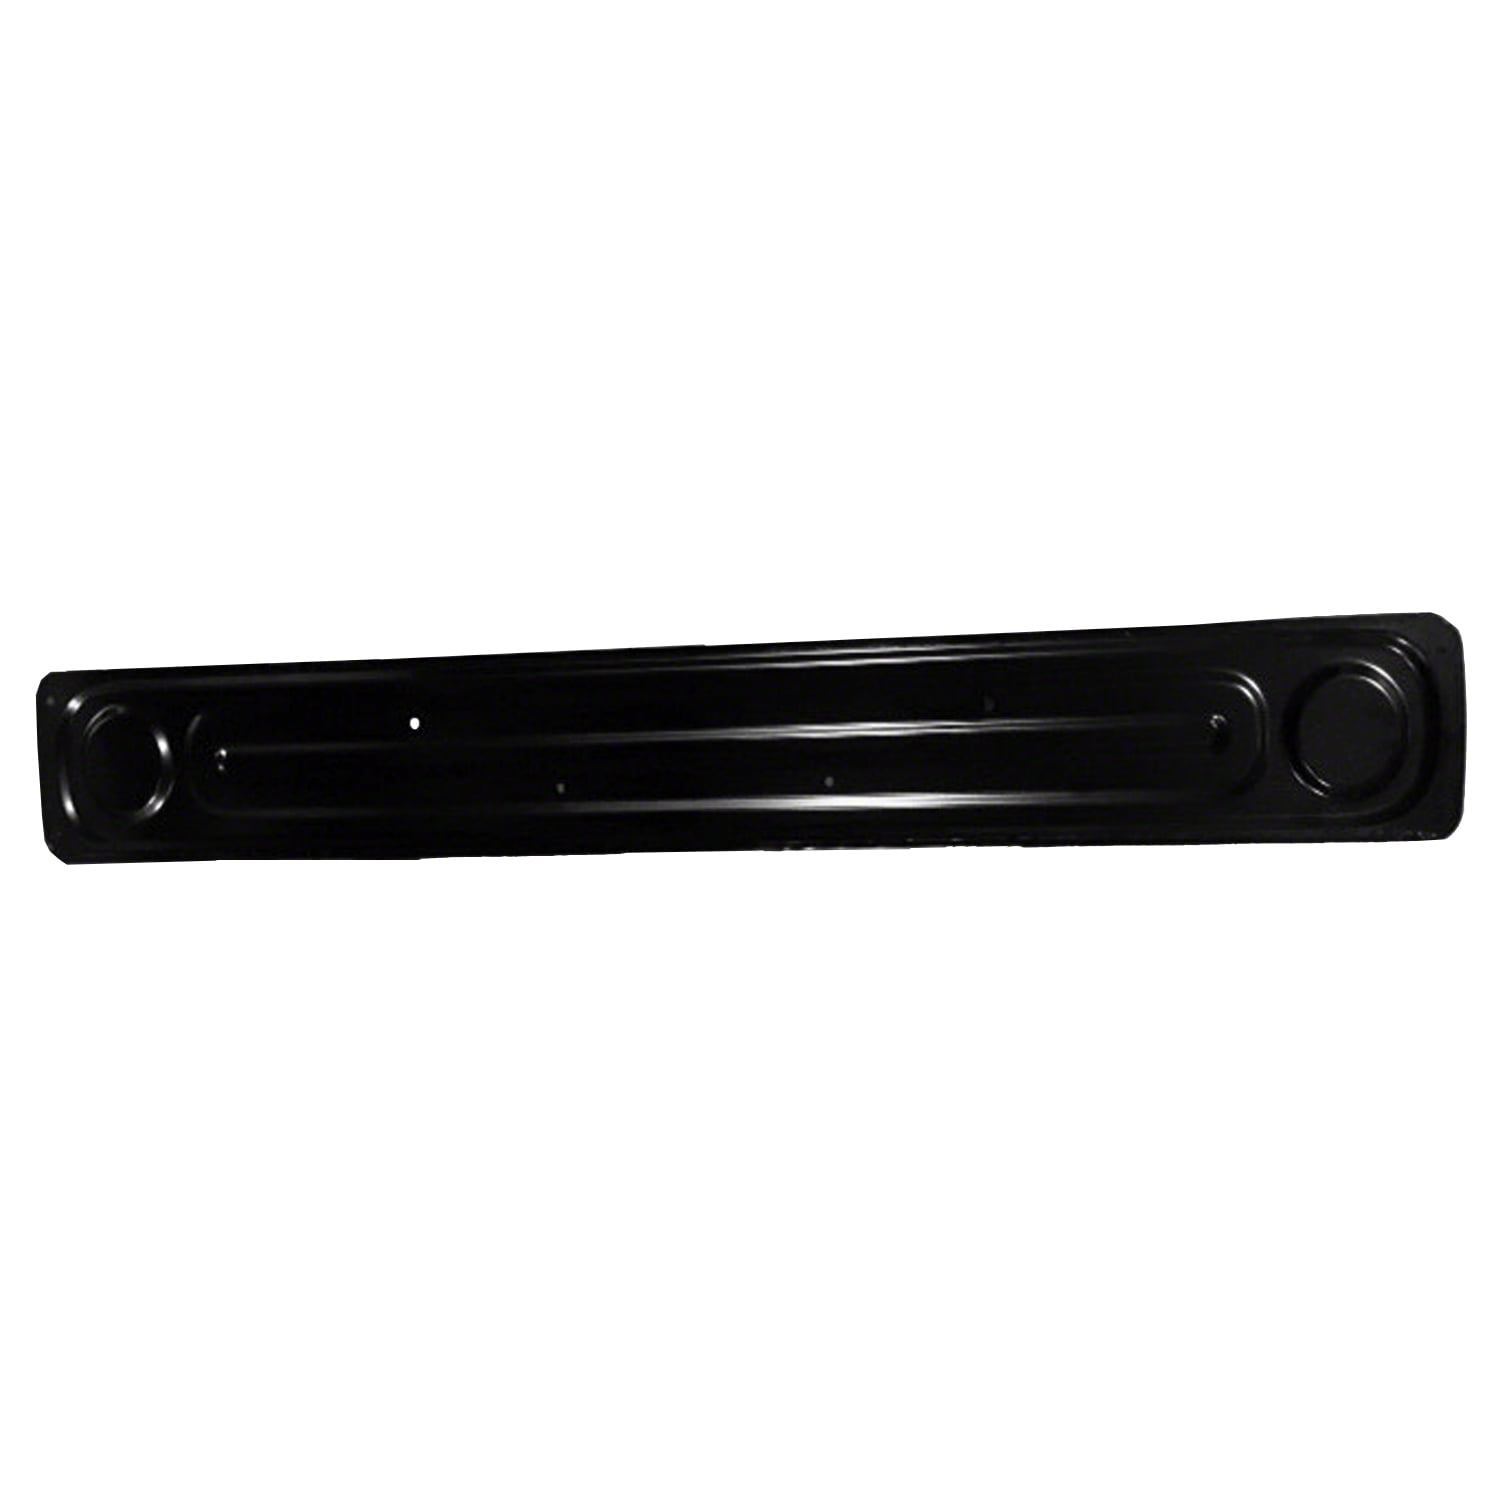 New Standard Replacement Tailgate Gap Cover Fits 2009 2010 Dodge Ram 1500